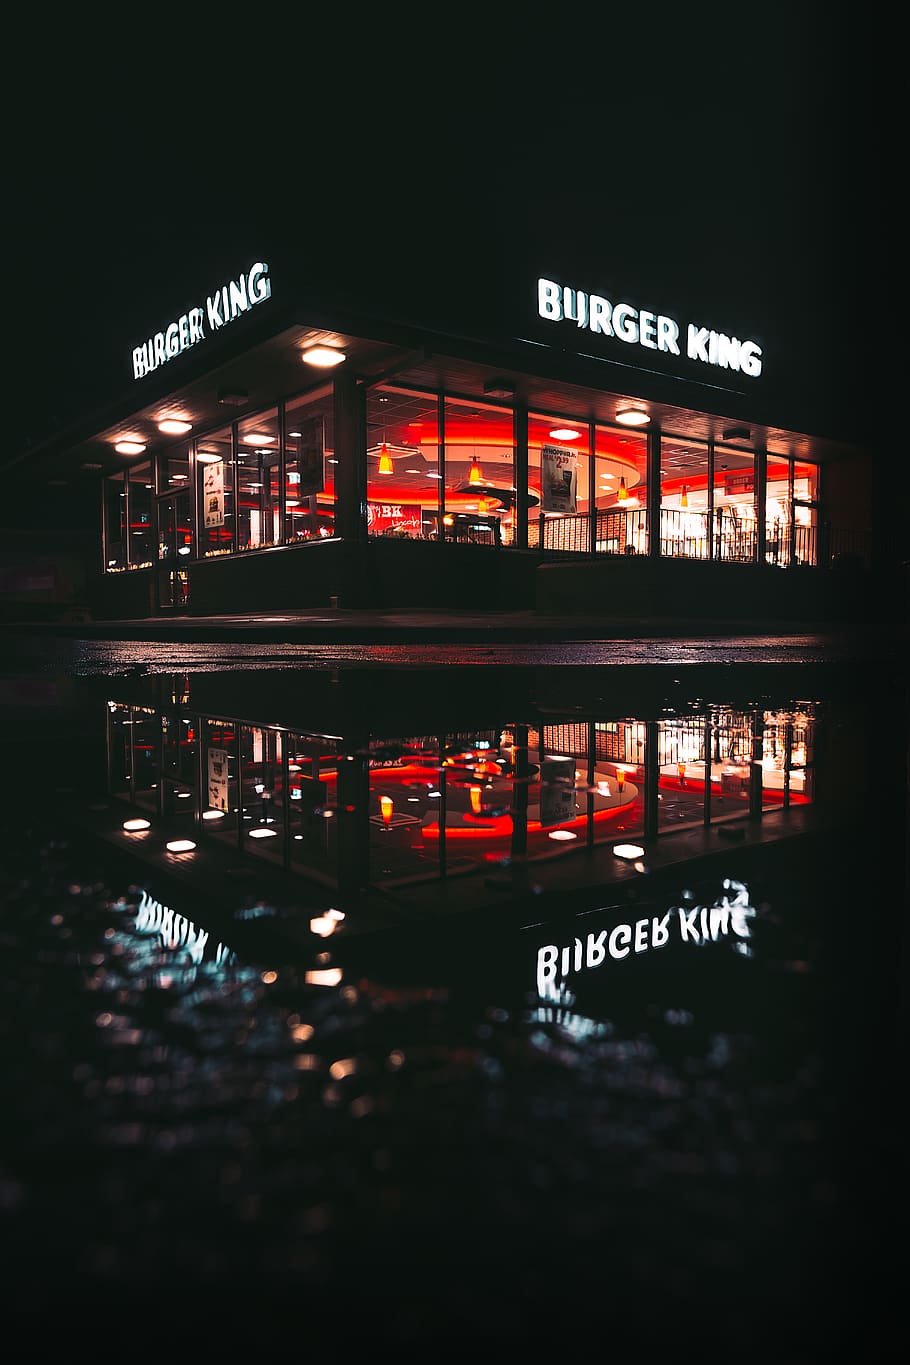 food, lighting, meal, restaurant, water, night, building, architecture